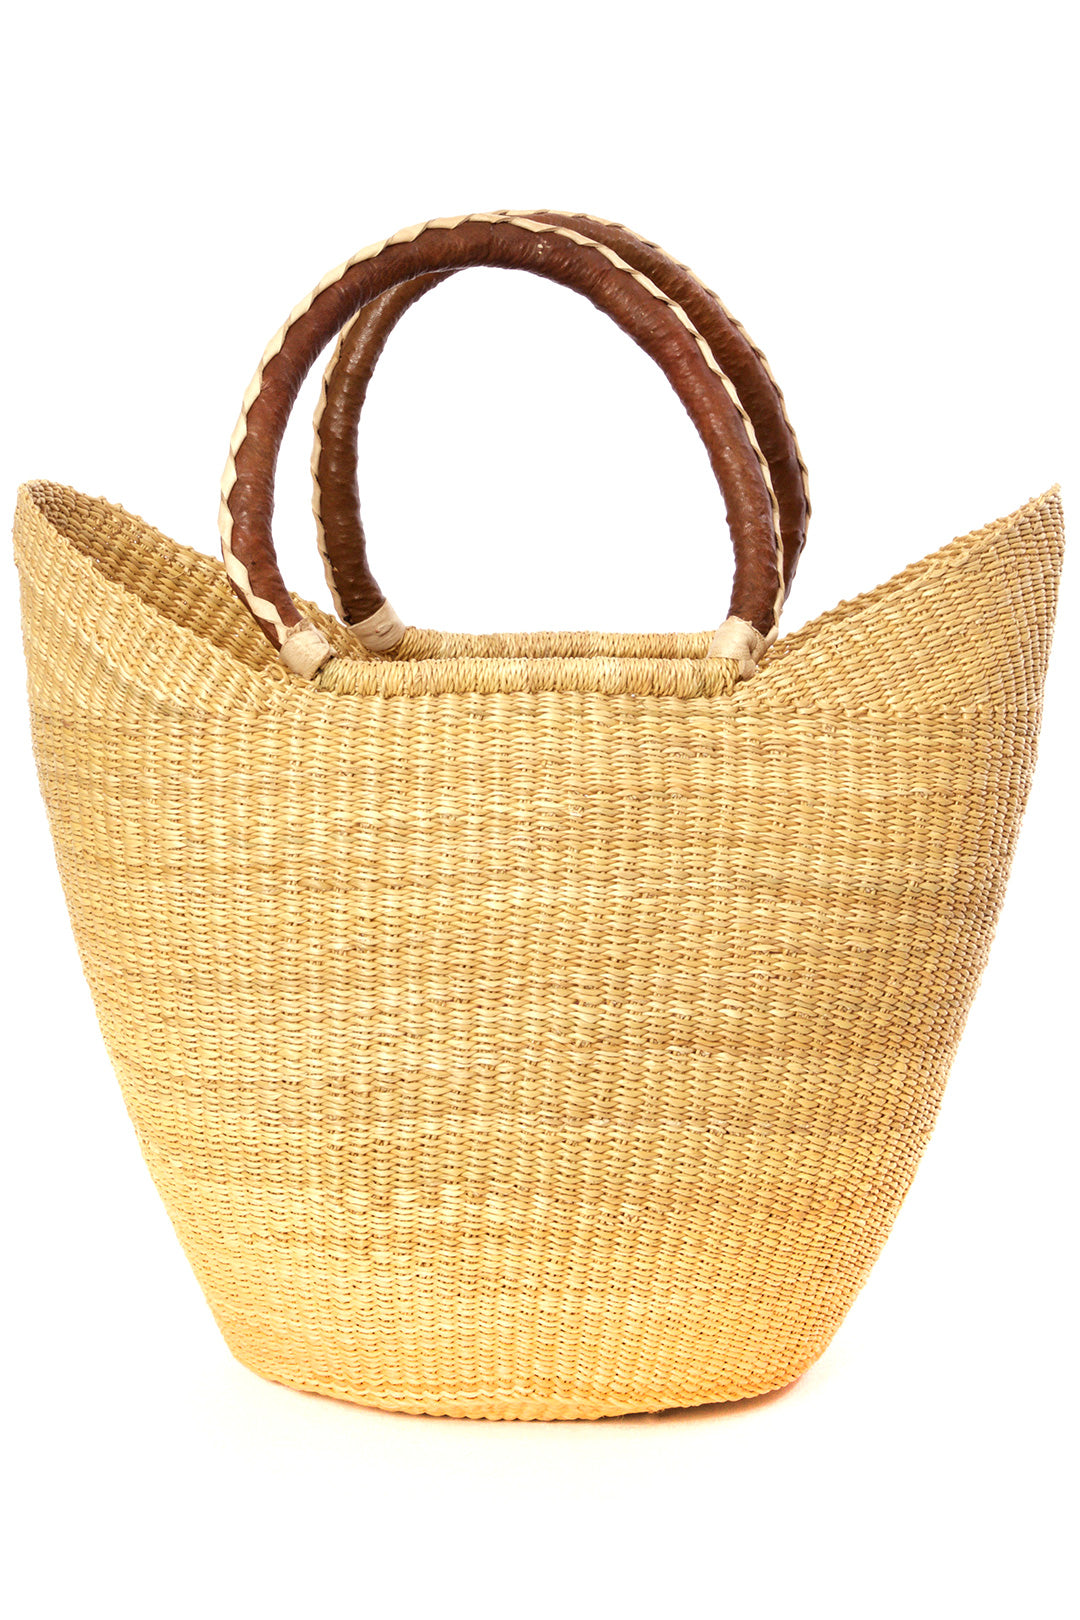 Natural Ghanaian Wing Shopper with Braided Brown Leather Handles